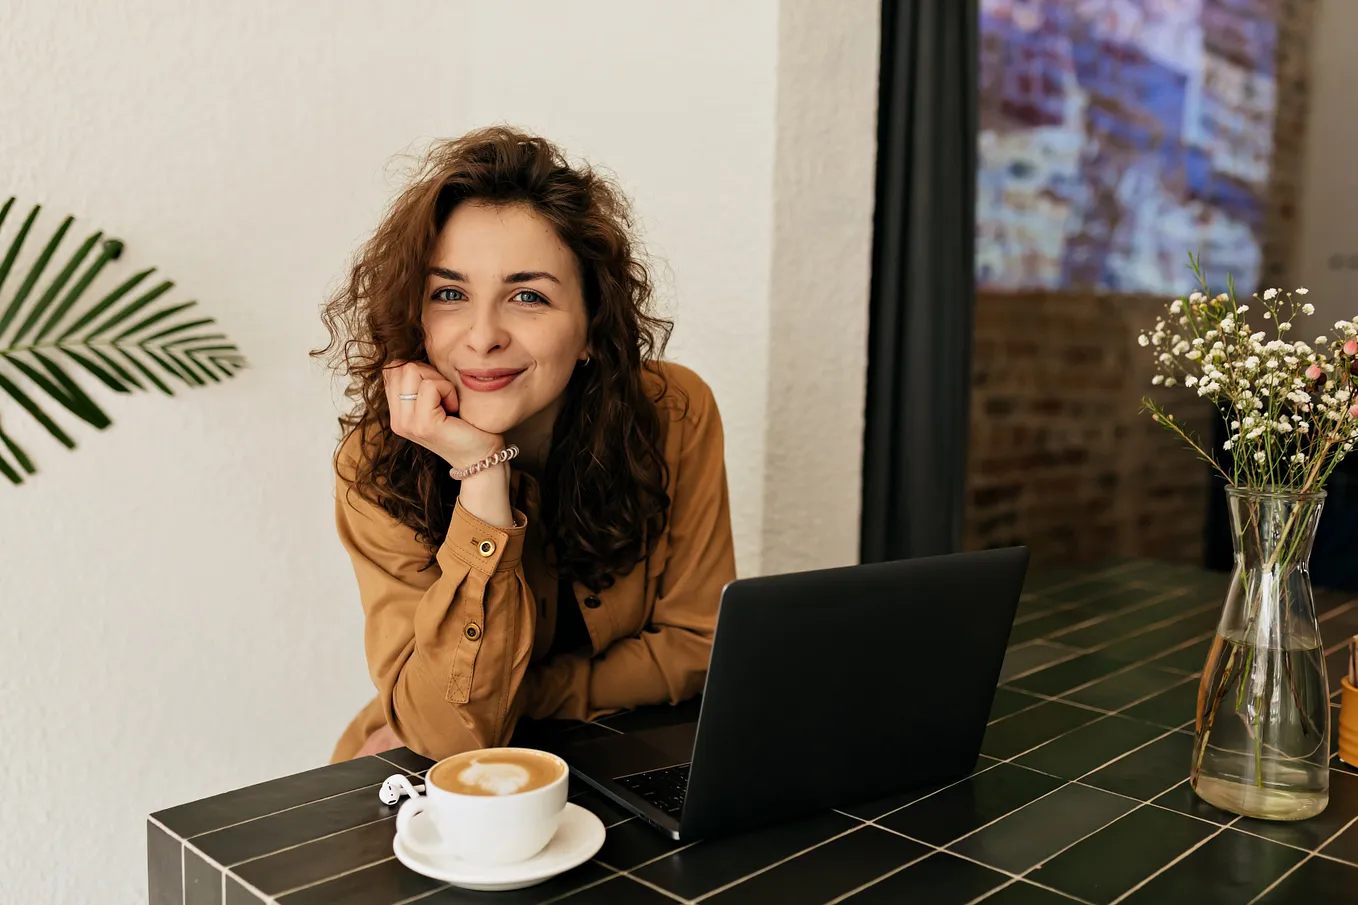 Woman at laptop with coffee smiling at camera